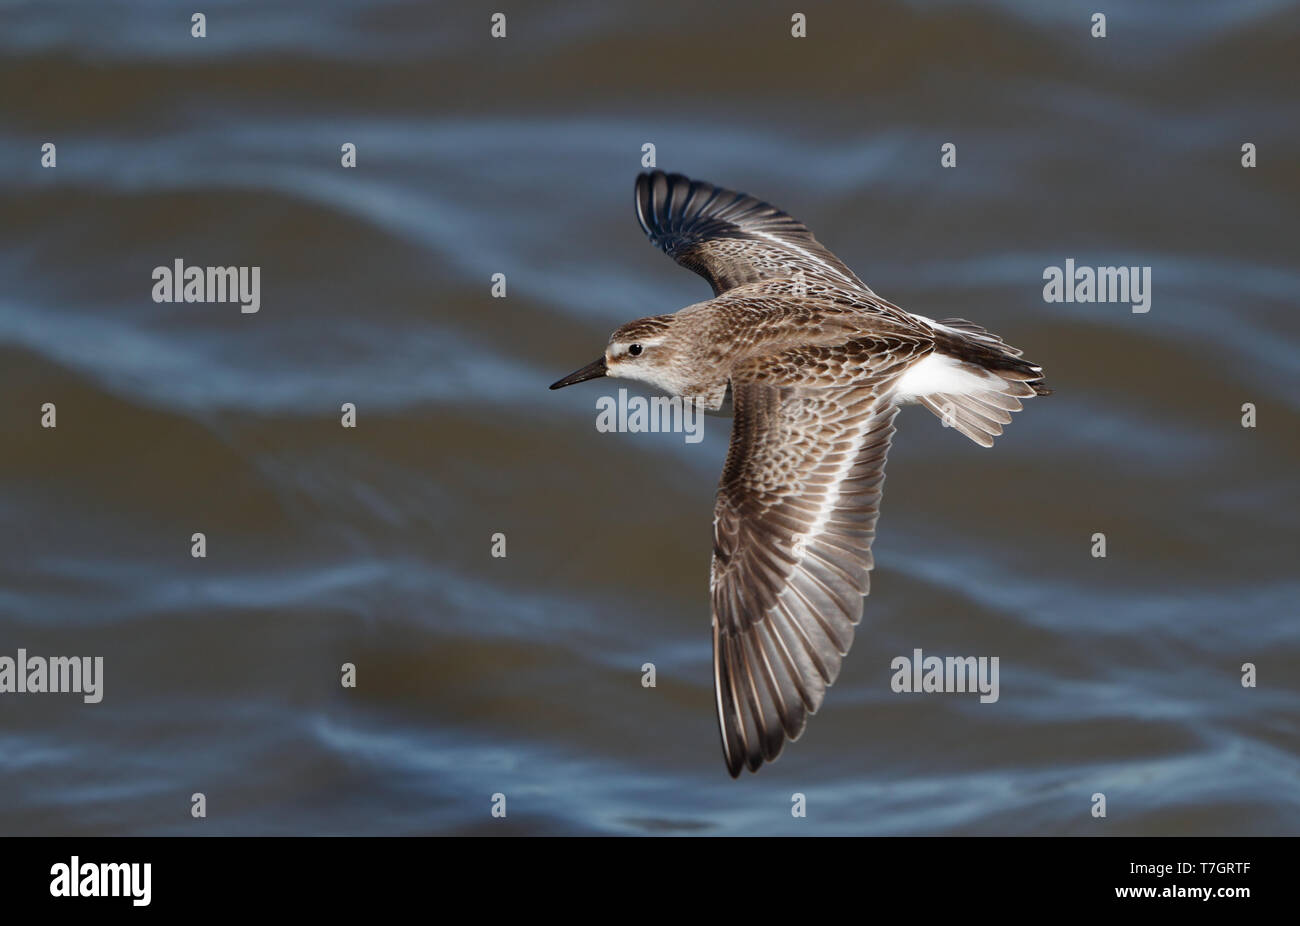 First-winter Semipalmated Sandpiper (Calidris pusilla) in flight at Reed's Beach, New Jersey, USA. Seen from above. Stock Photo